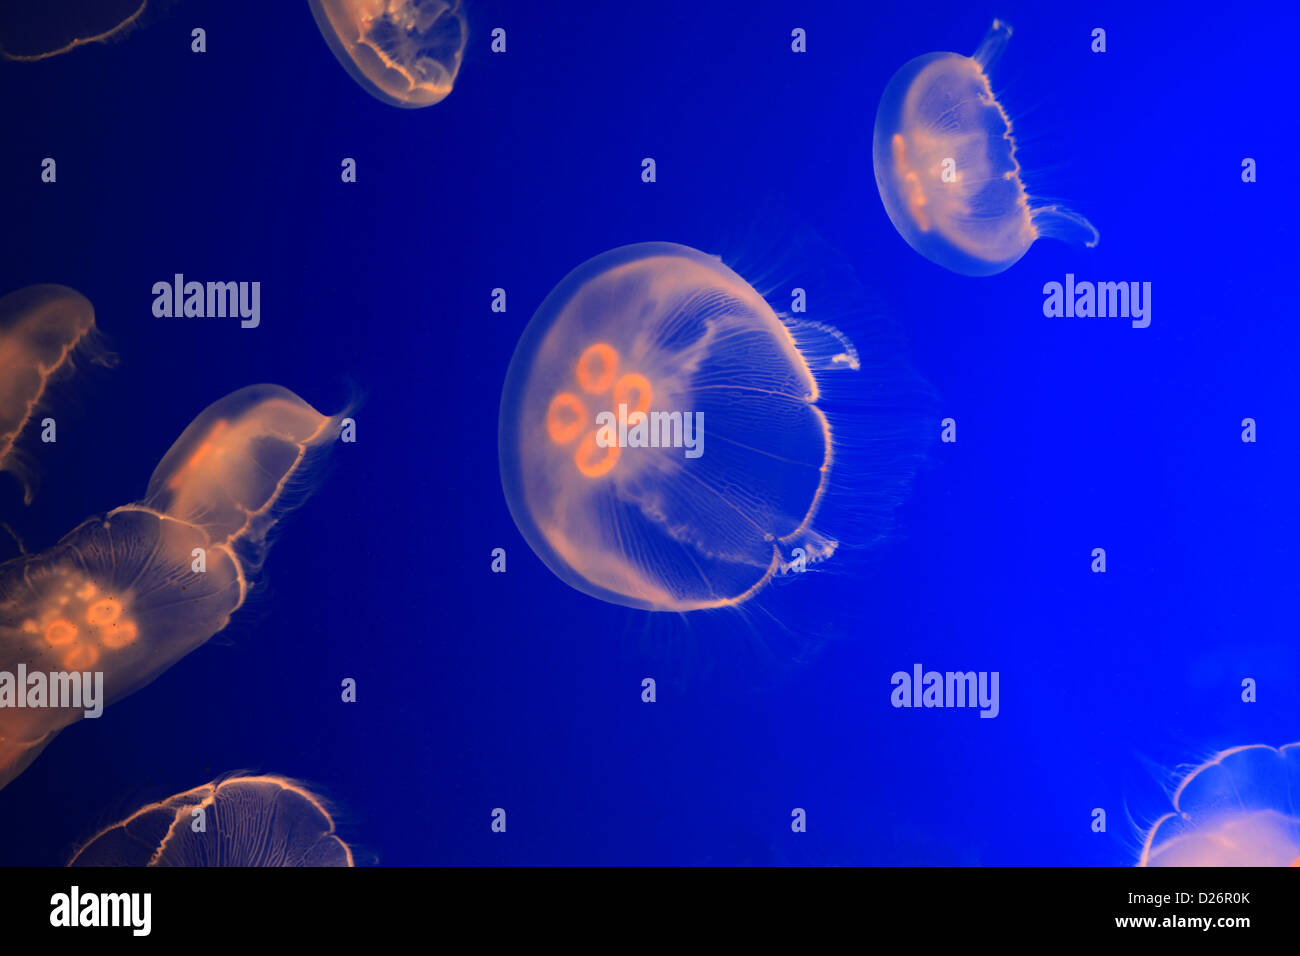 Jelly fish swimming in blue water Stock Photo